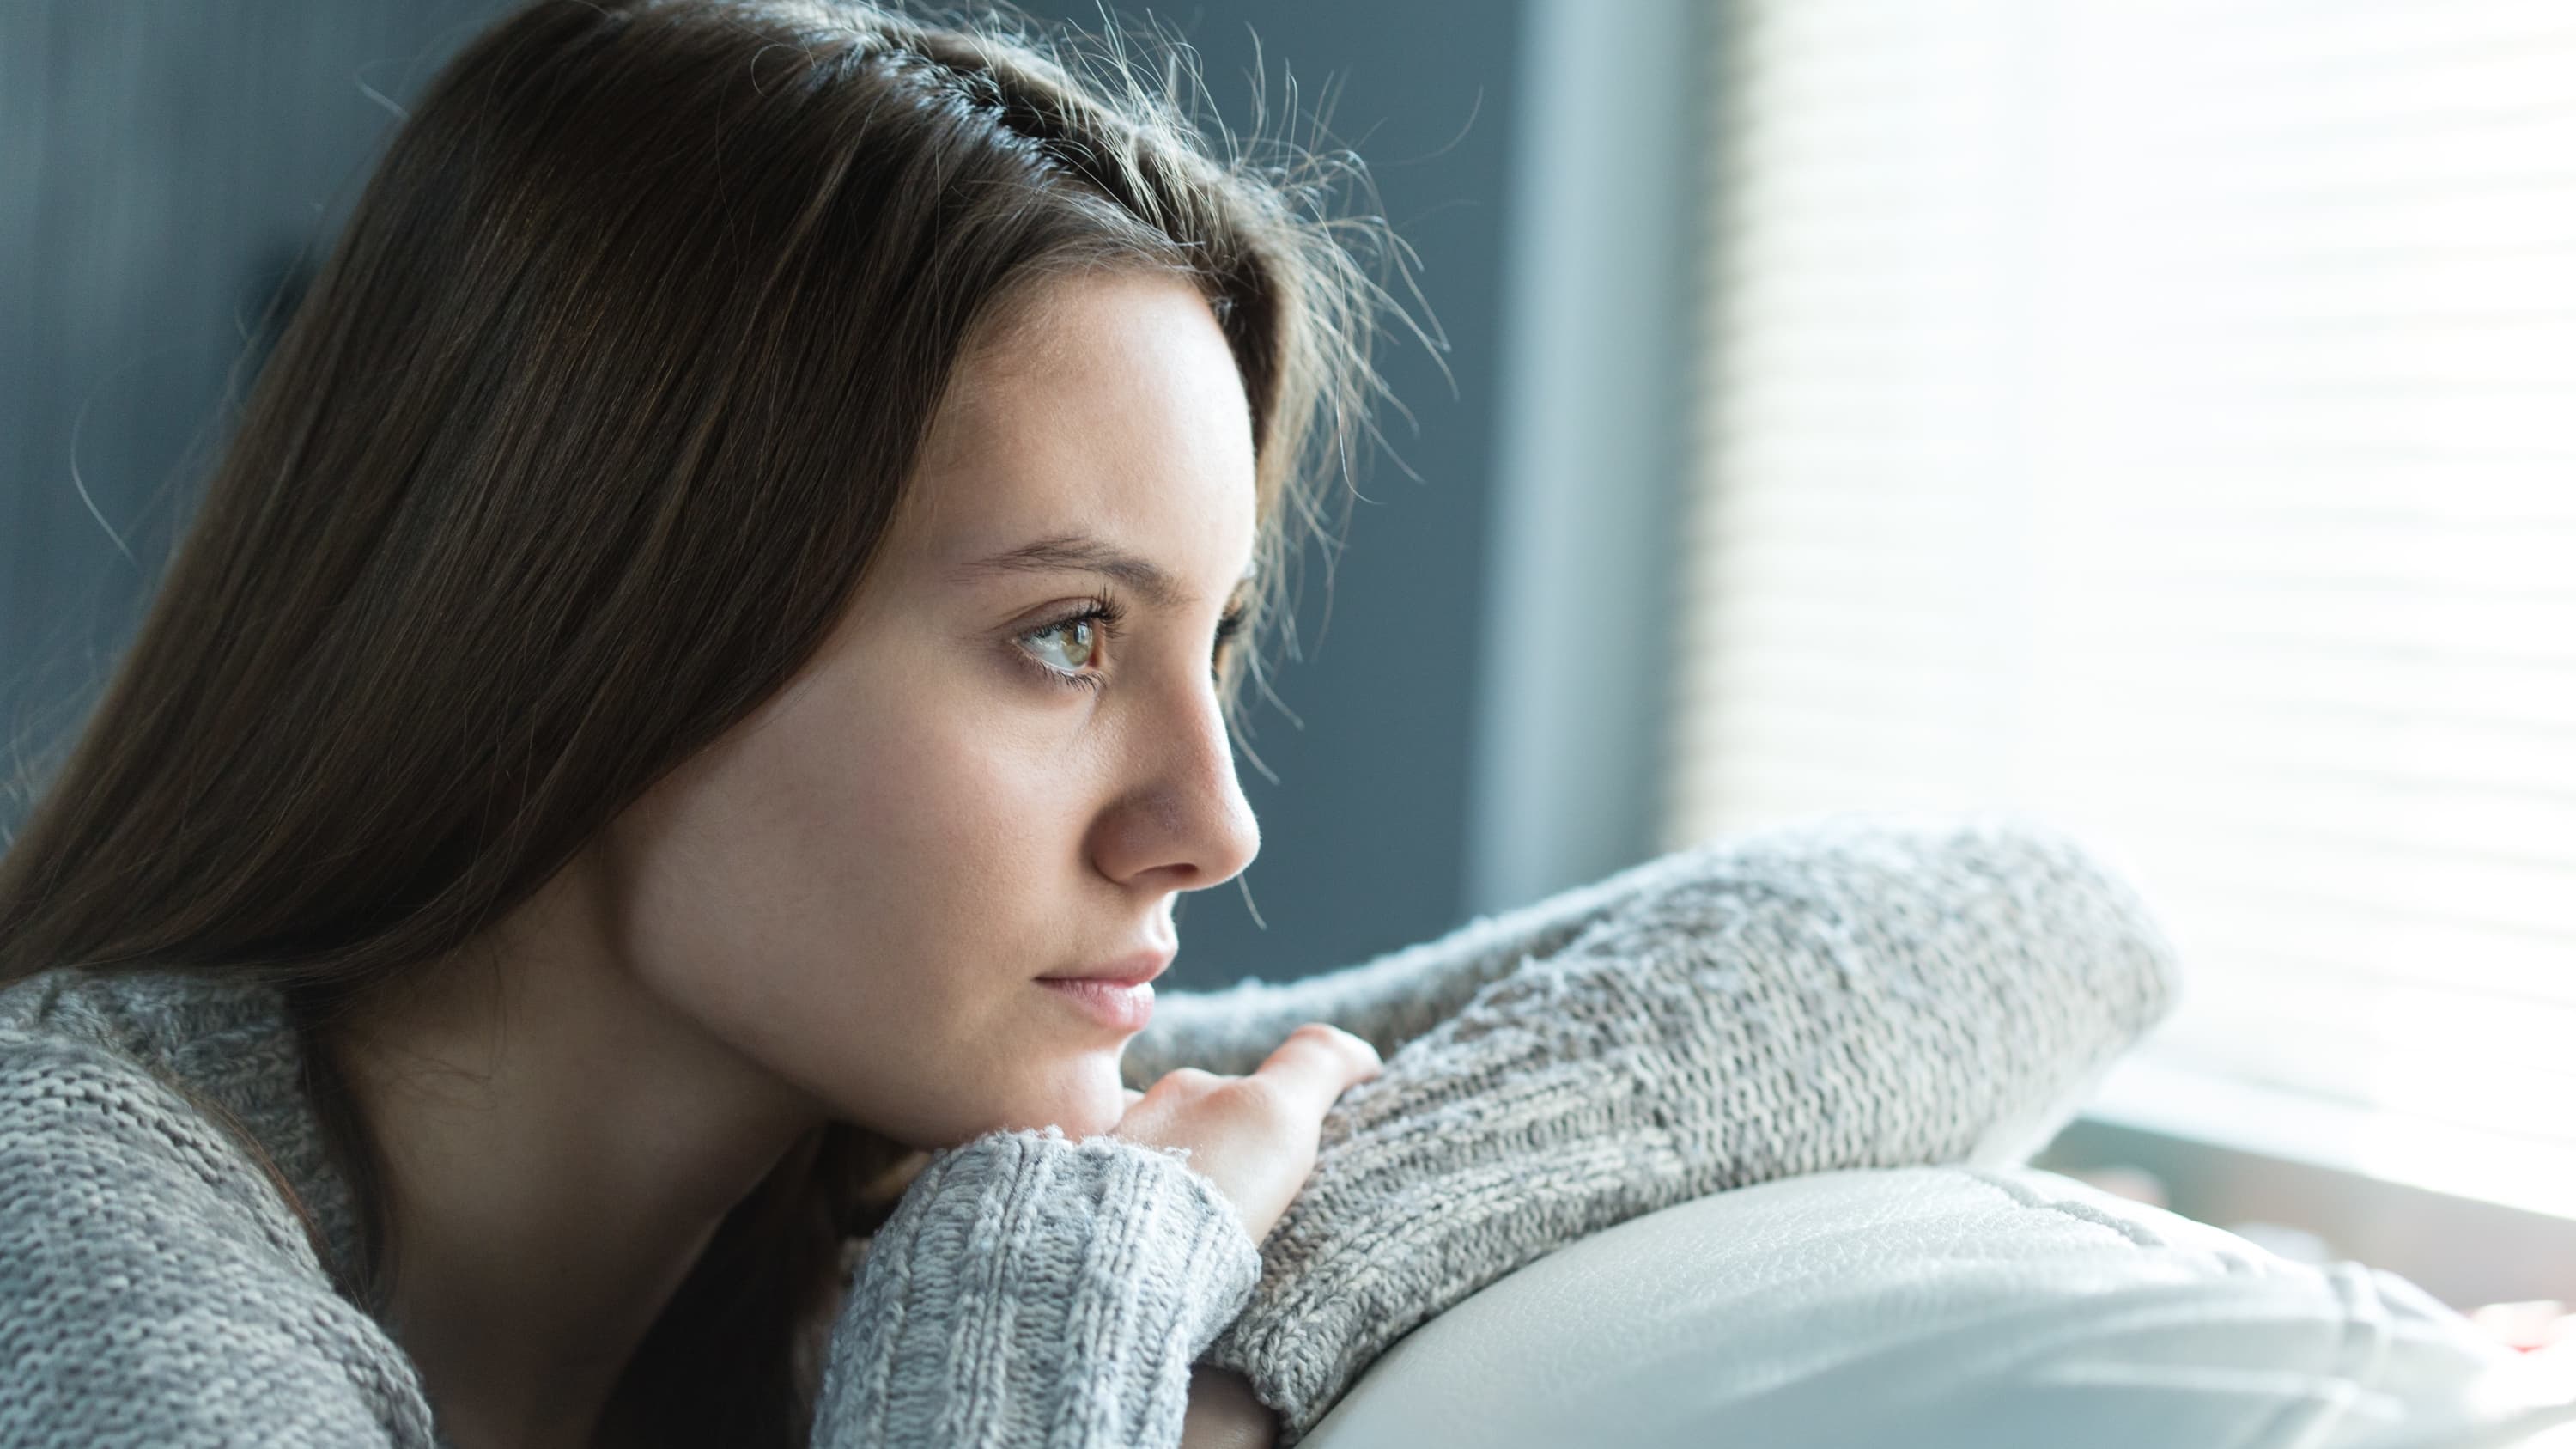 woman looking out window, possibly worried about vaginitis